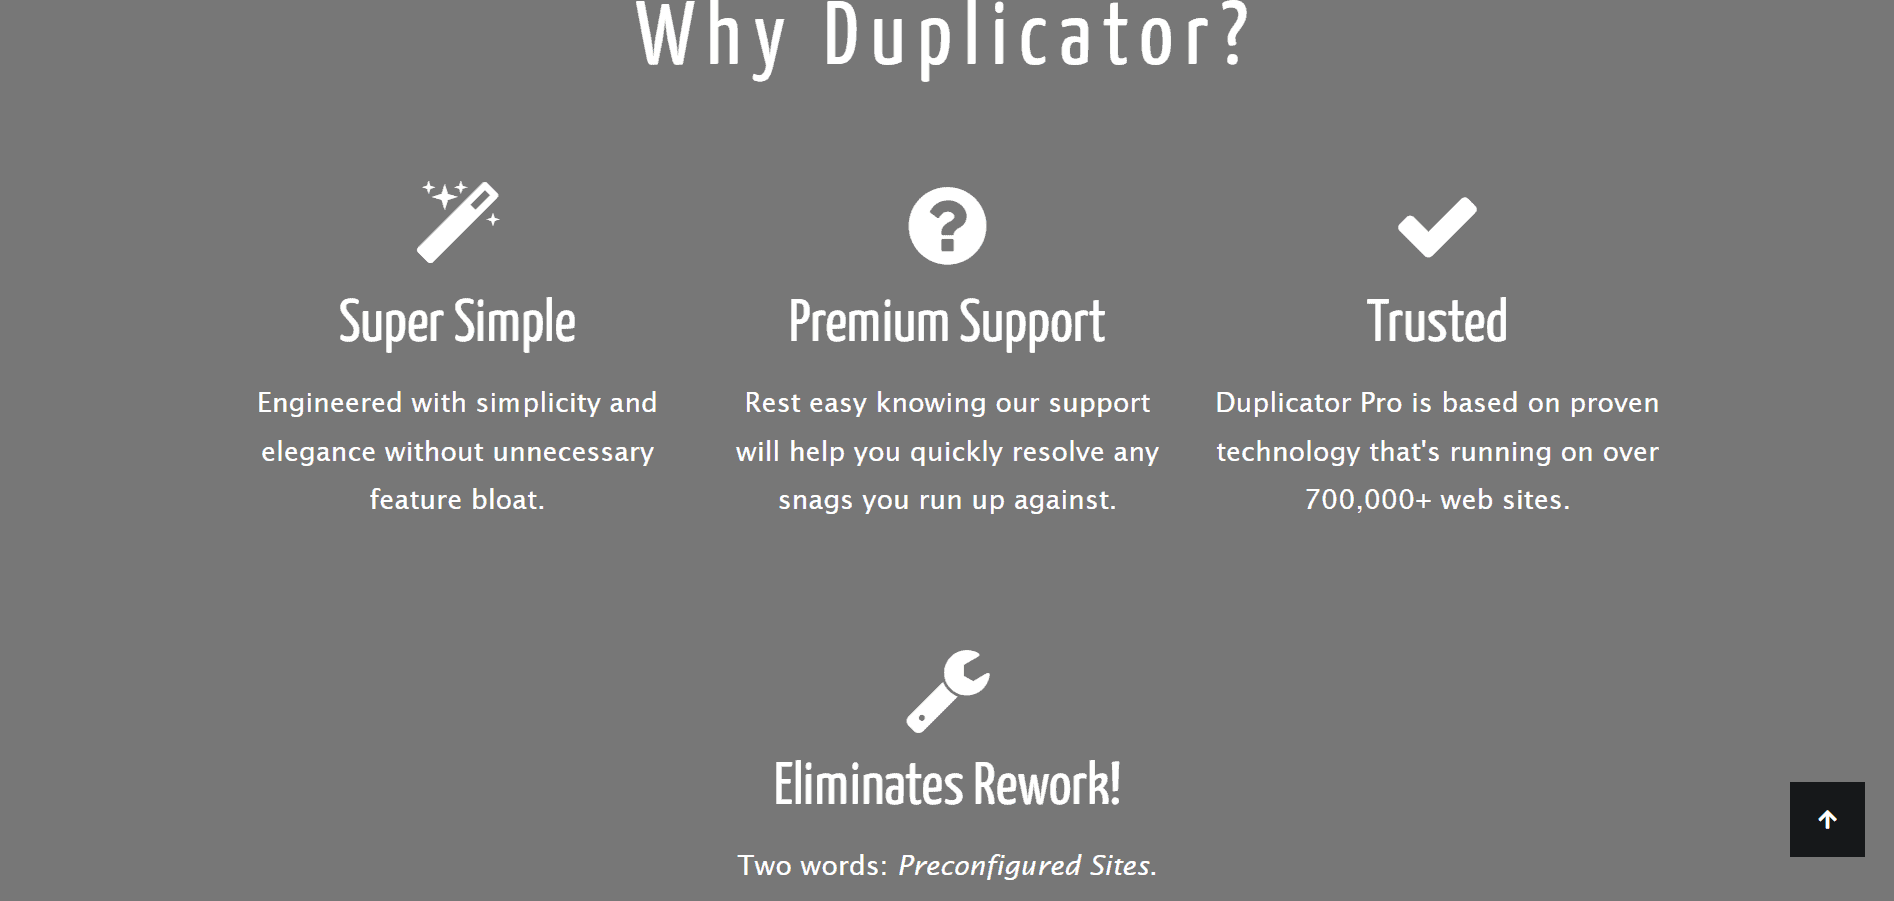 Duplicator Pro_ Why we recommend